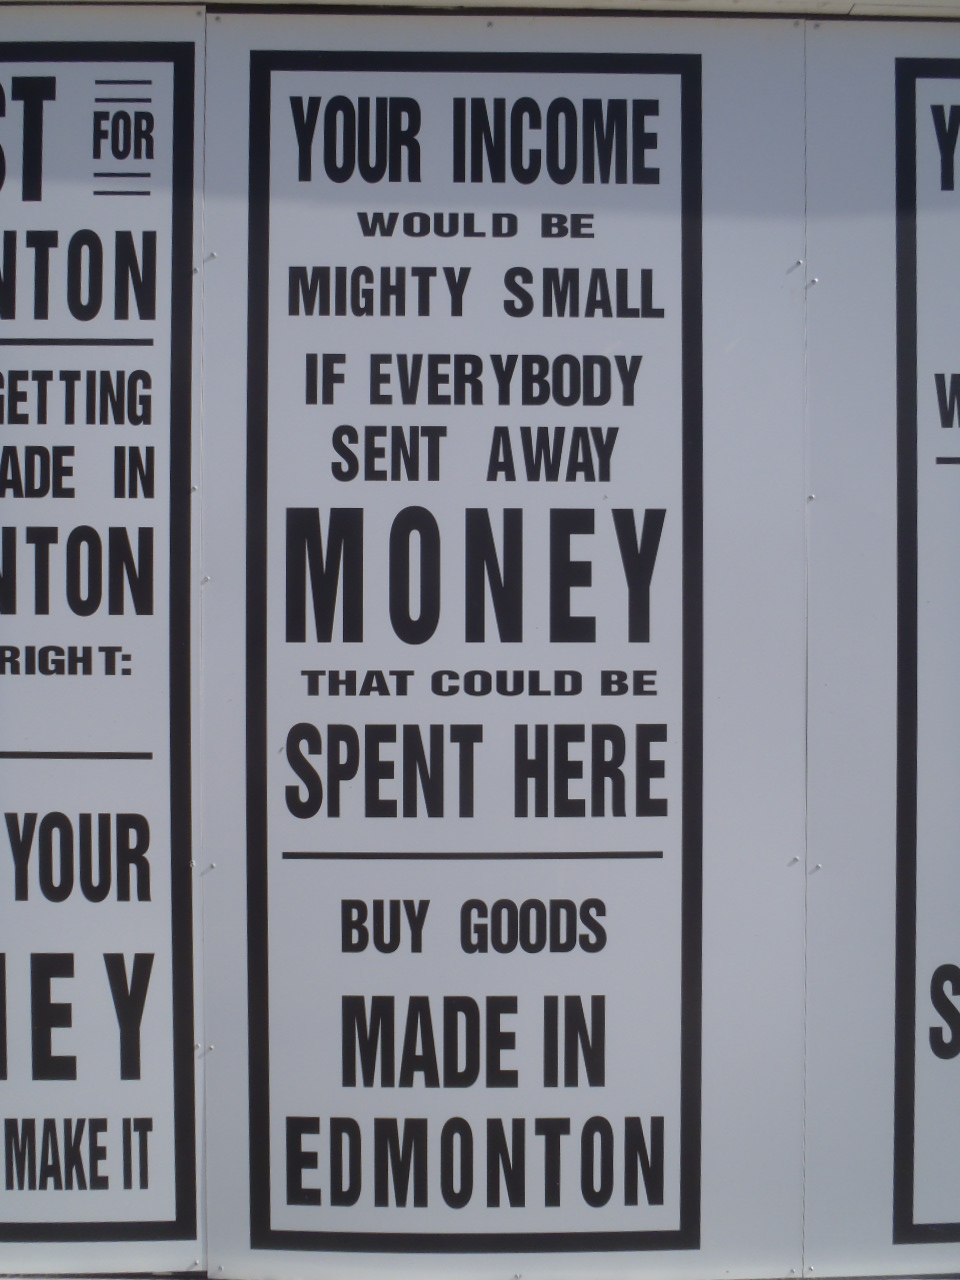 And one more old-timey "buy local" sign at Fort Edmonton.